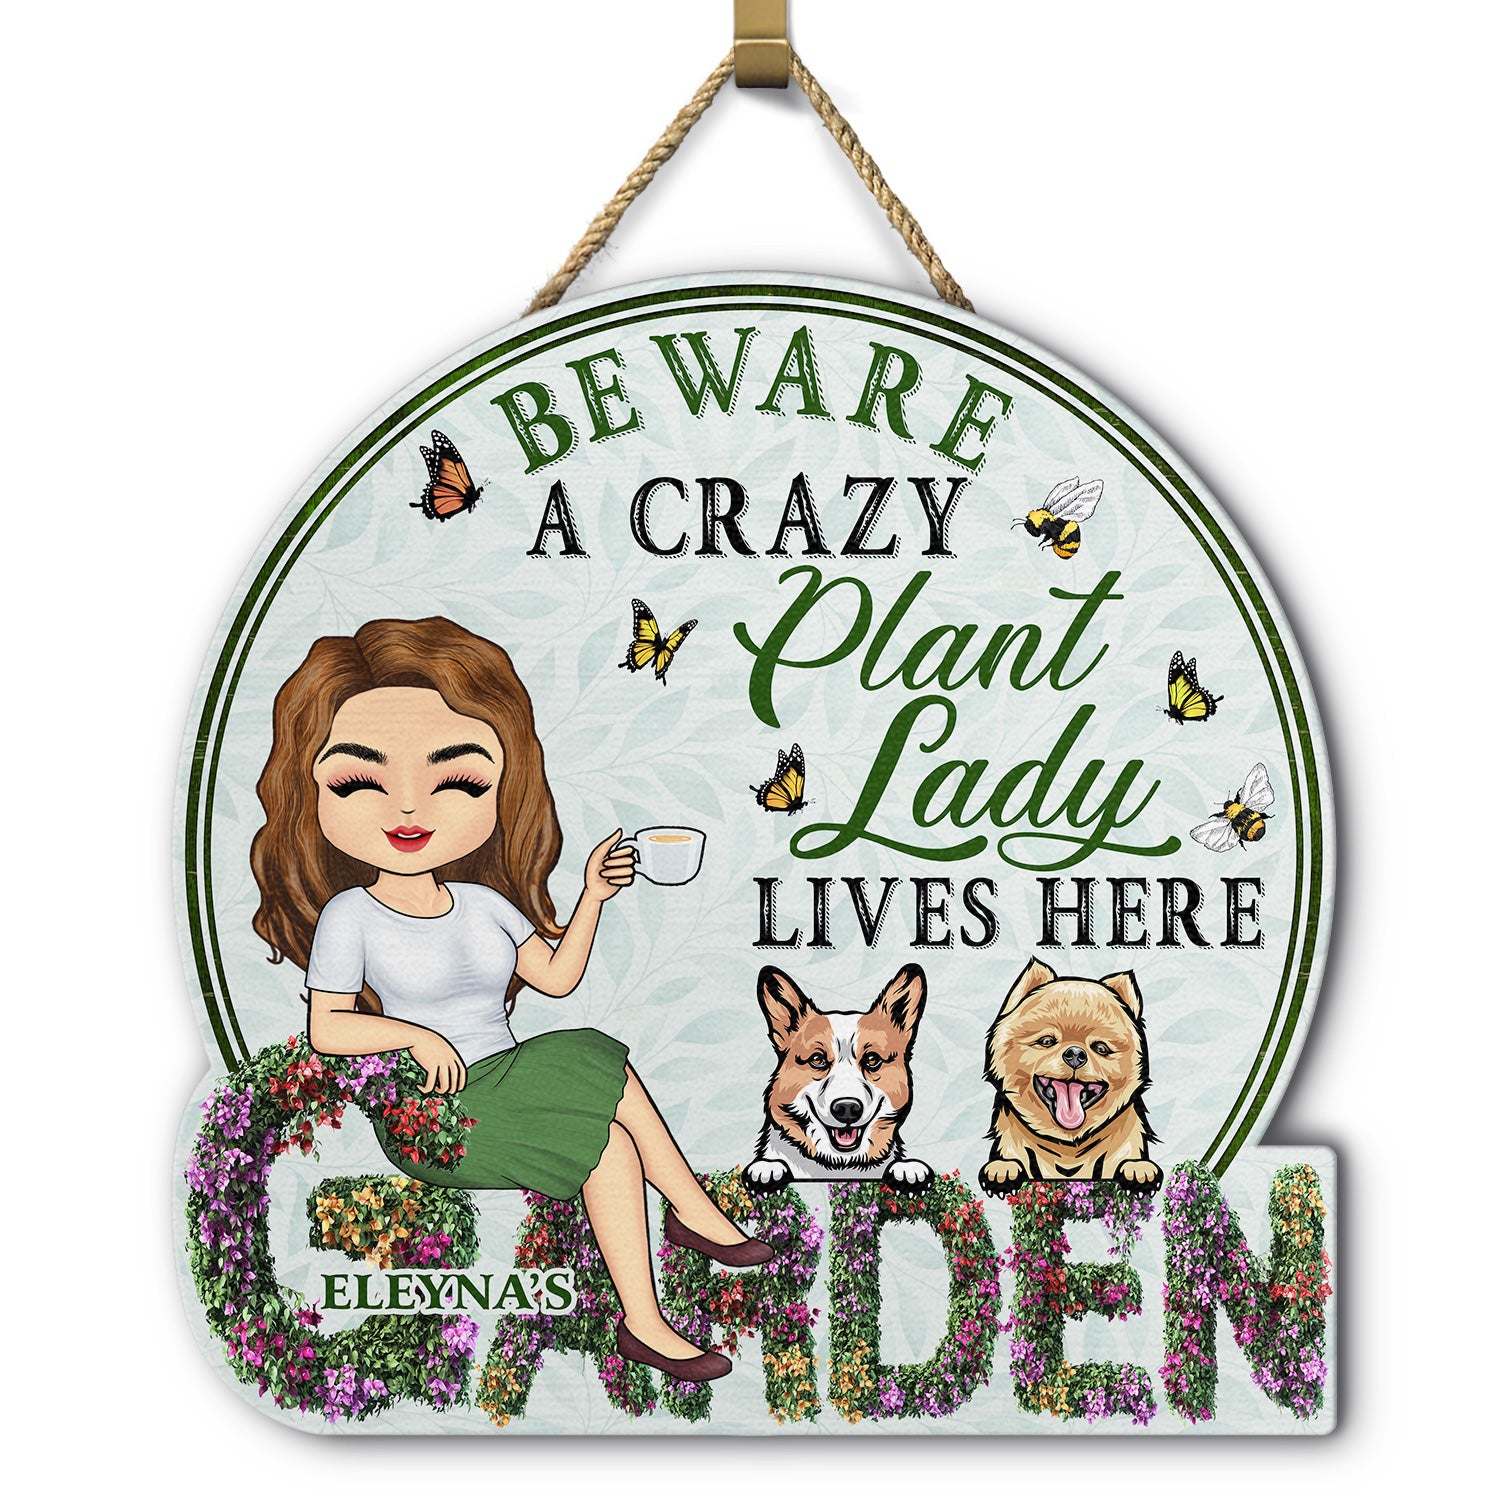 And Into The Garden I Go - Beware A Crazy Plant Lady Lives Here - Birthday, Housewarming Gift For Her, Him, Gardener, Outdoor Decor, Pet, Cat, Dog Lover - Personalized Custom Shaped Wood Sign